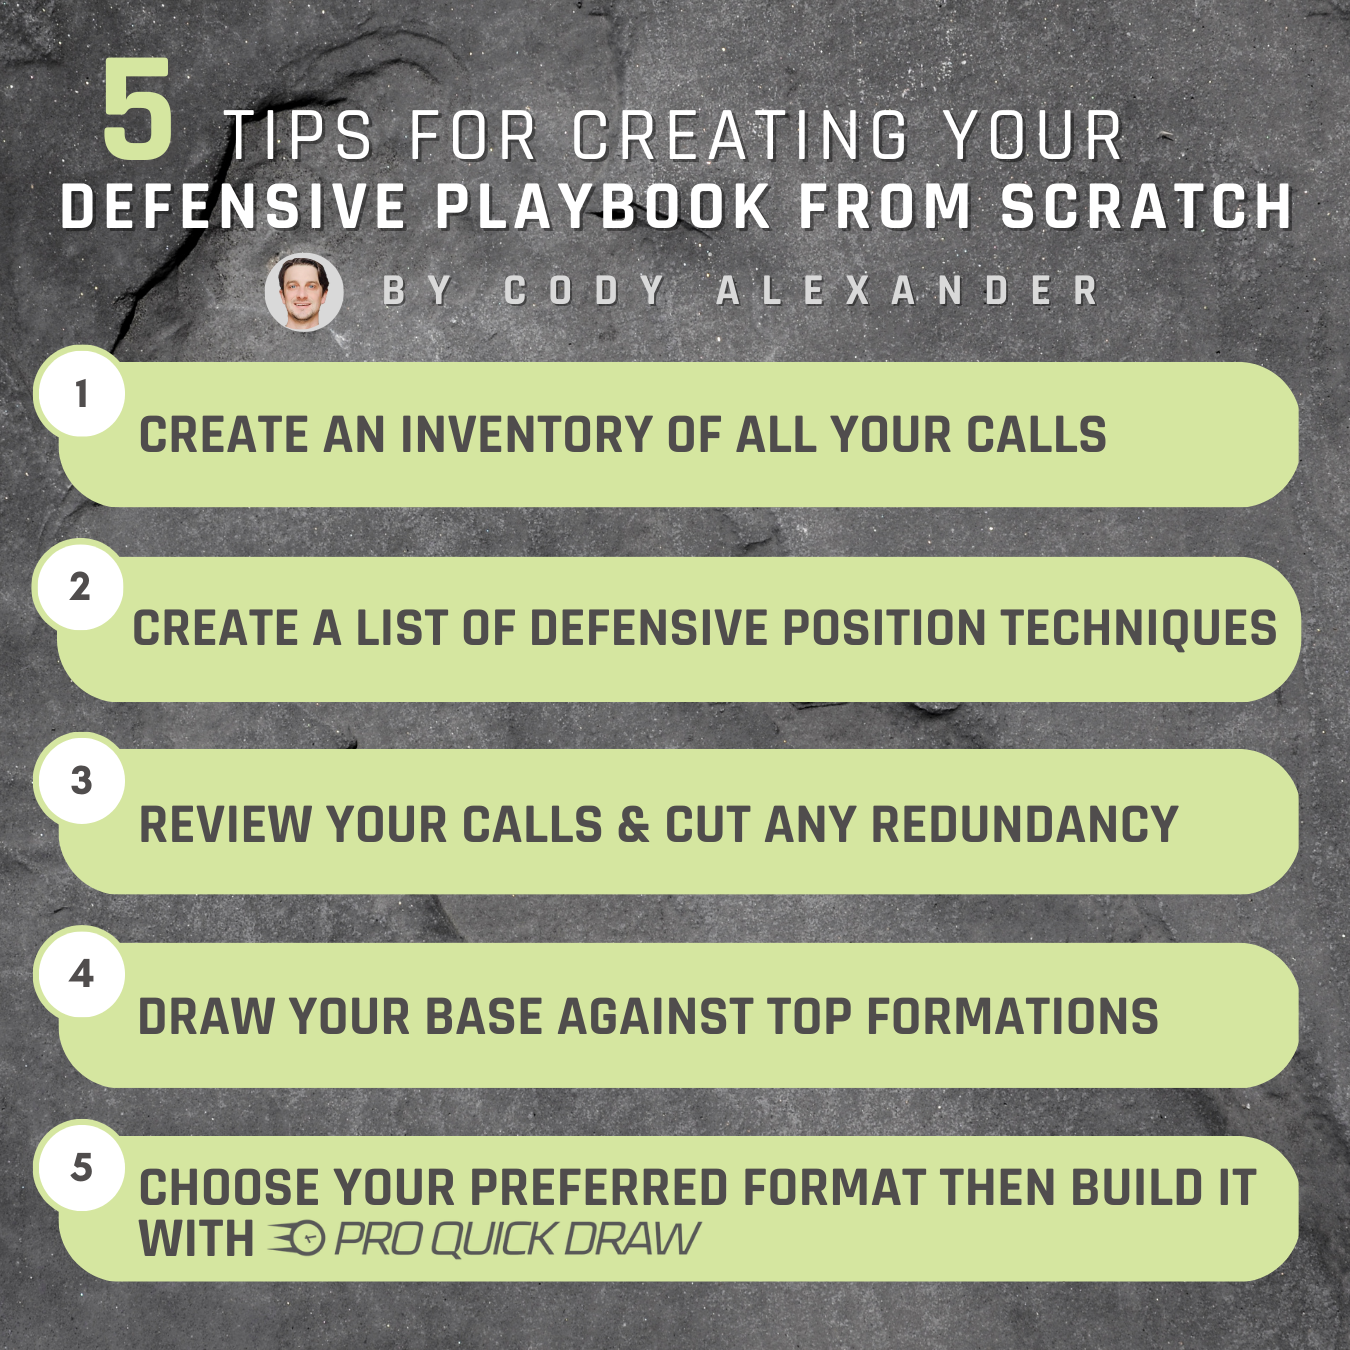 5 Tips for Making a Playbook from Scratch